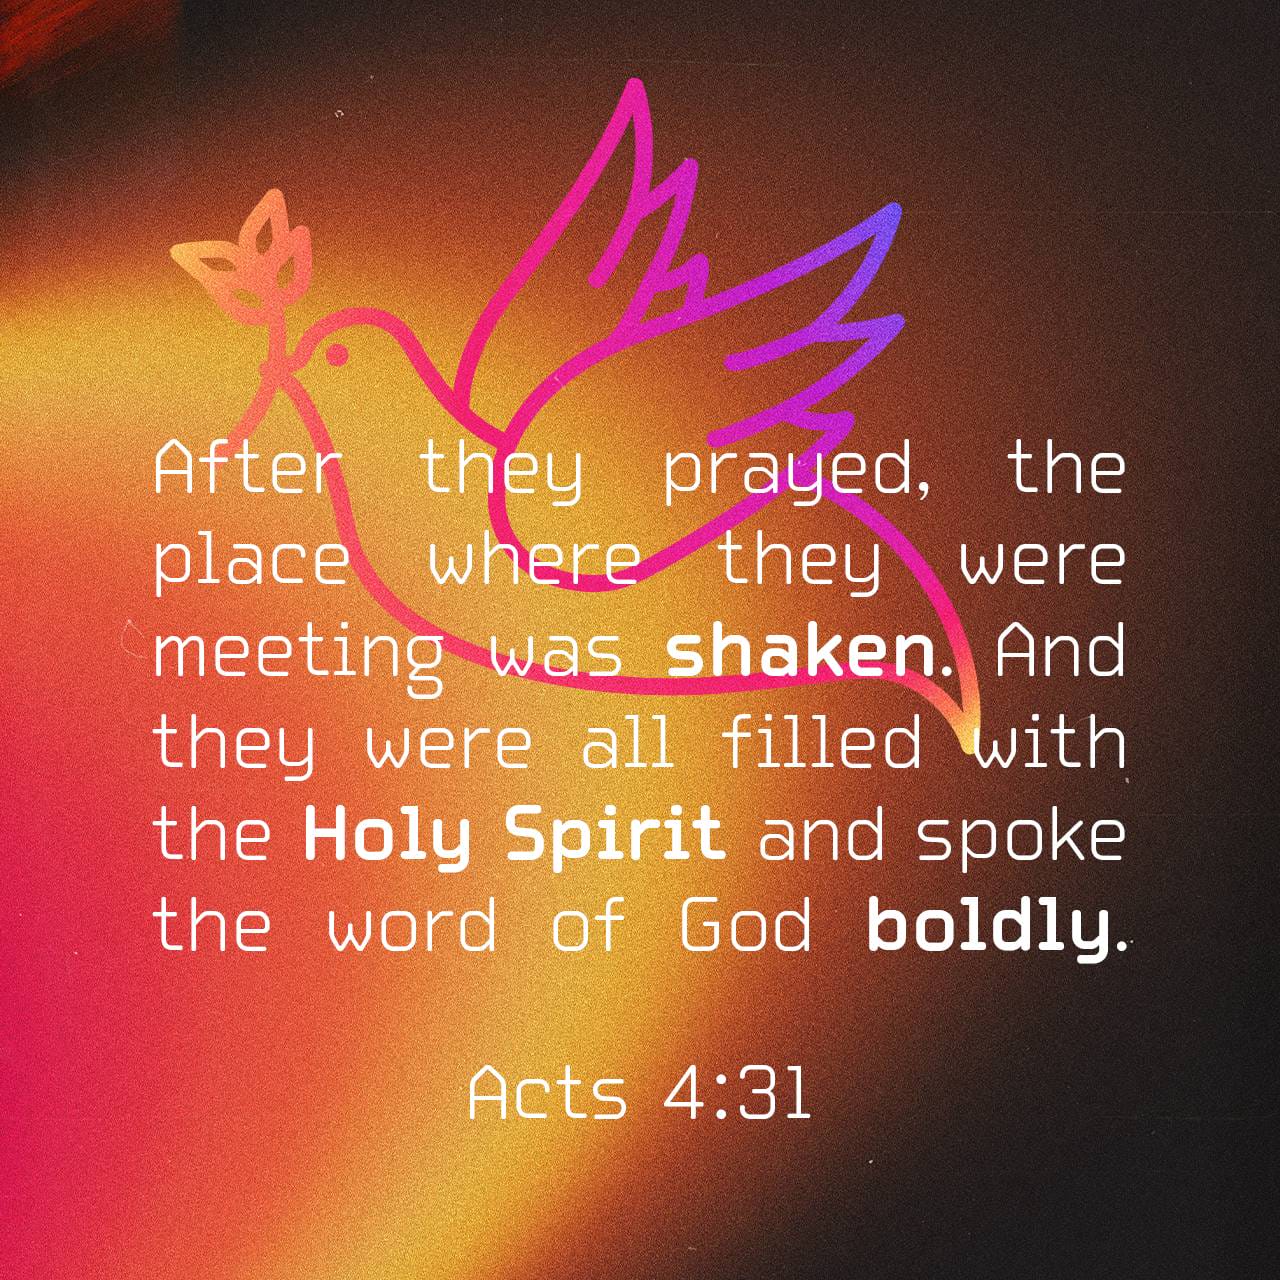 Ha29 05172015 - praying for boldness acts 4